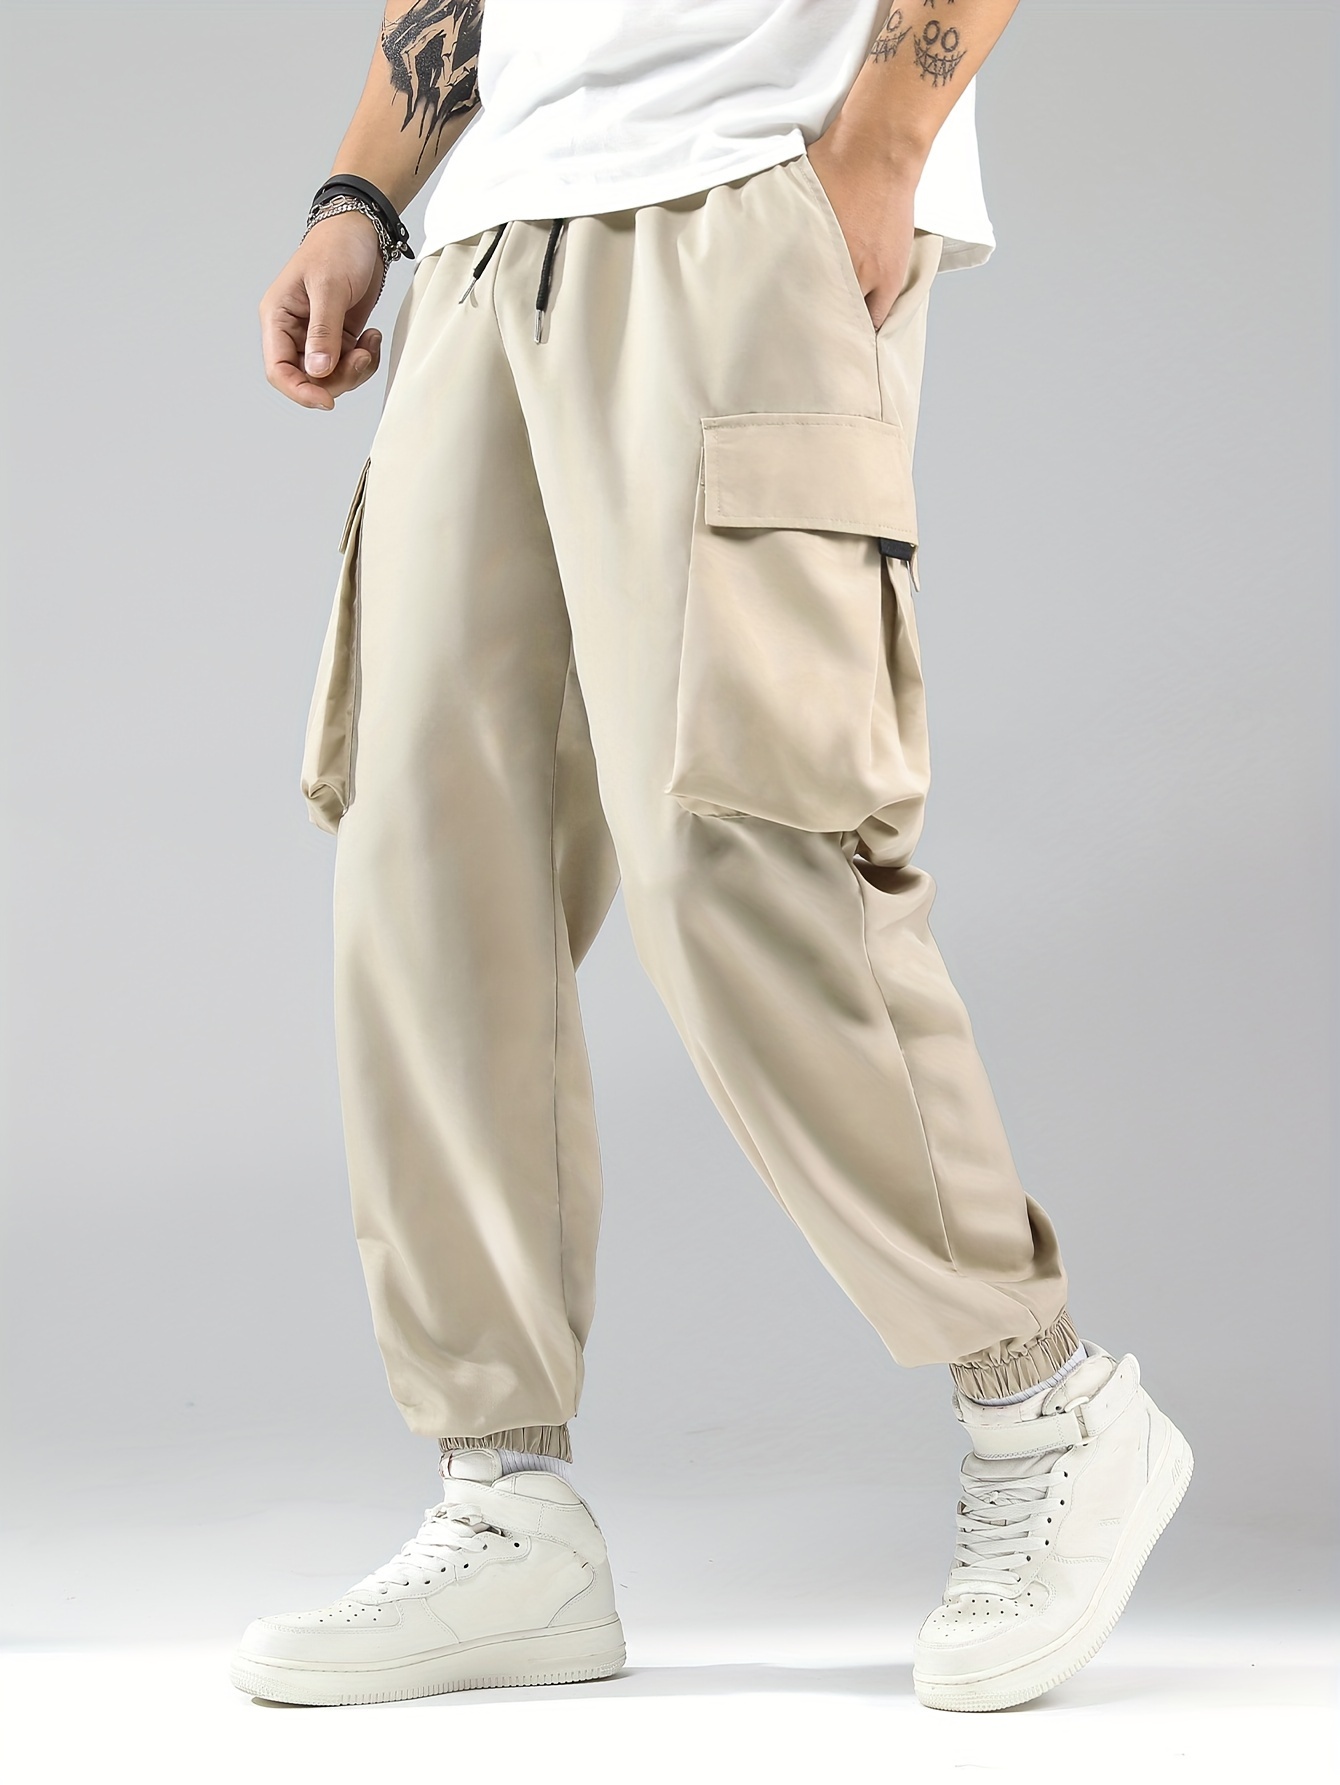 NEW Daily Paper Men's Slim Cargo Pants Style 3105 Size XS Street Wear  Casual